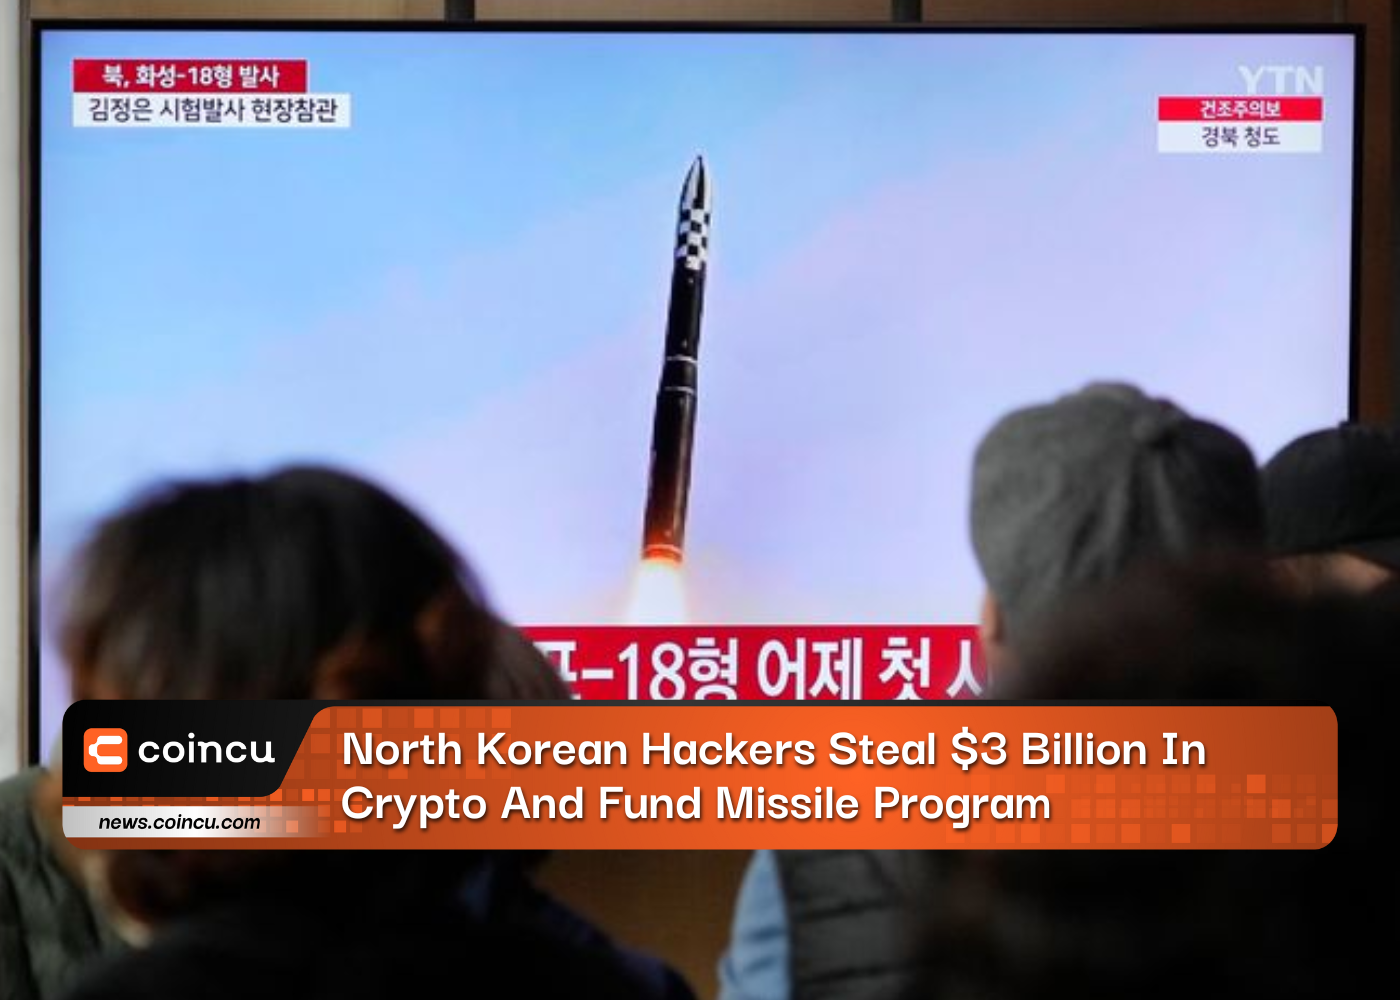 North Korean Hackers Steal $3 Billion In Crypto And Fund Missile Program